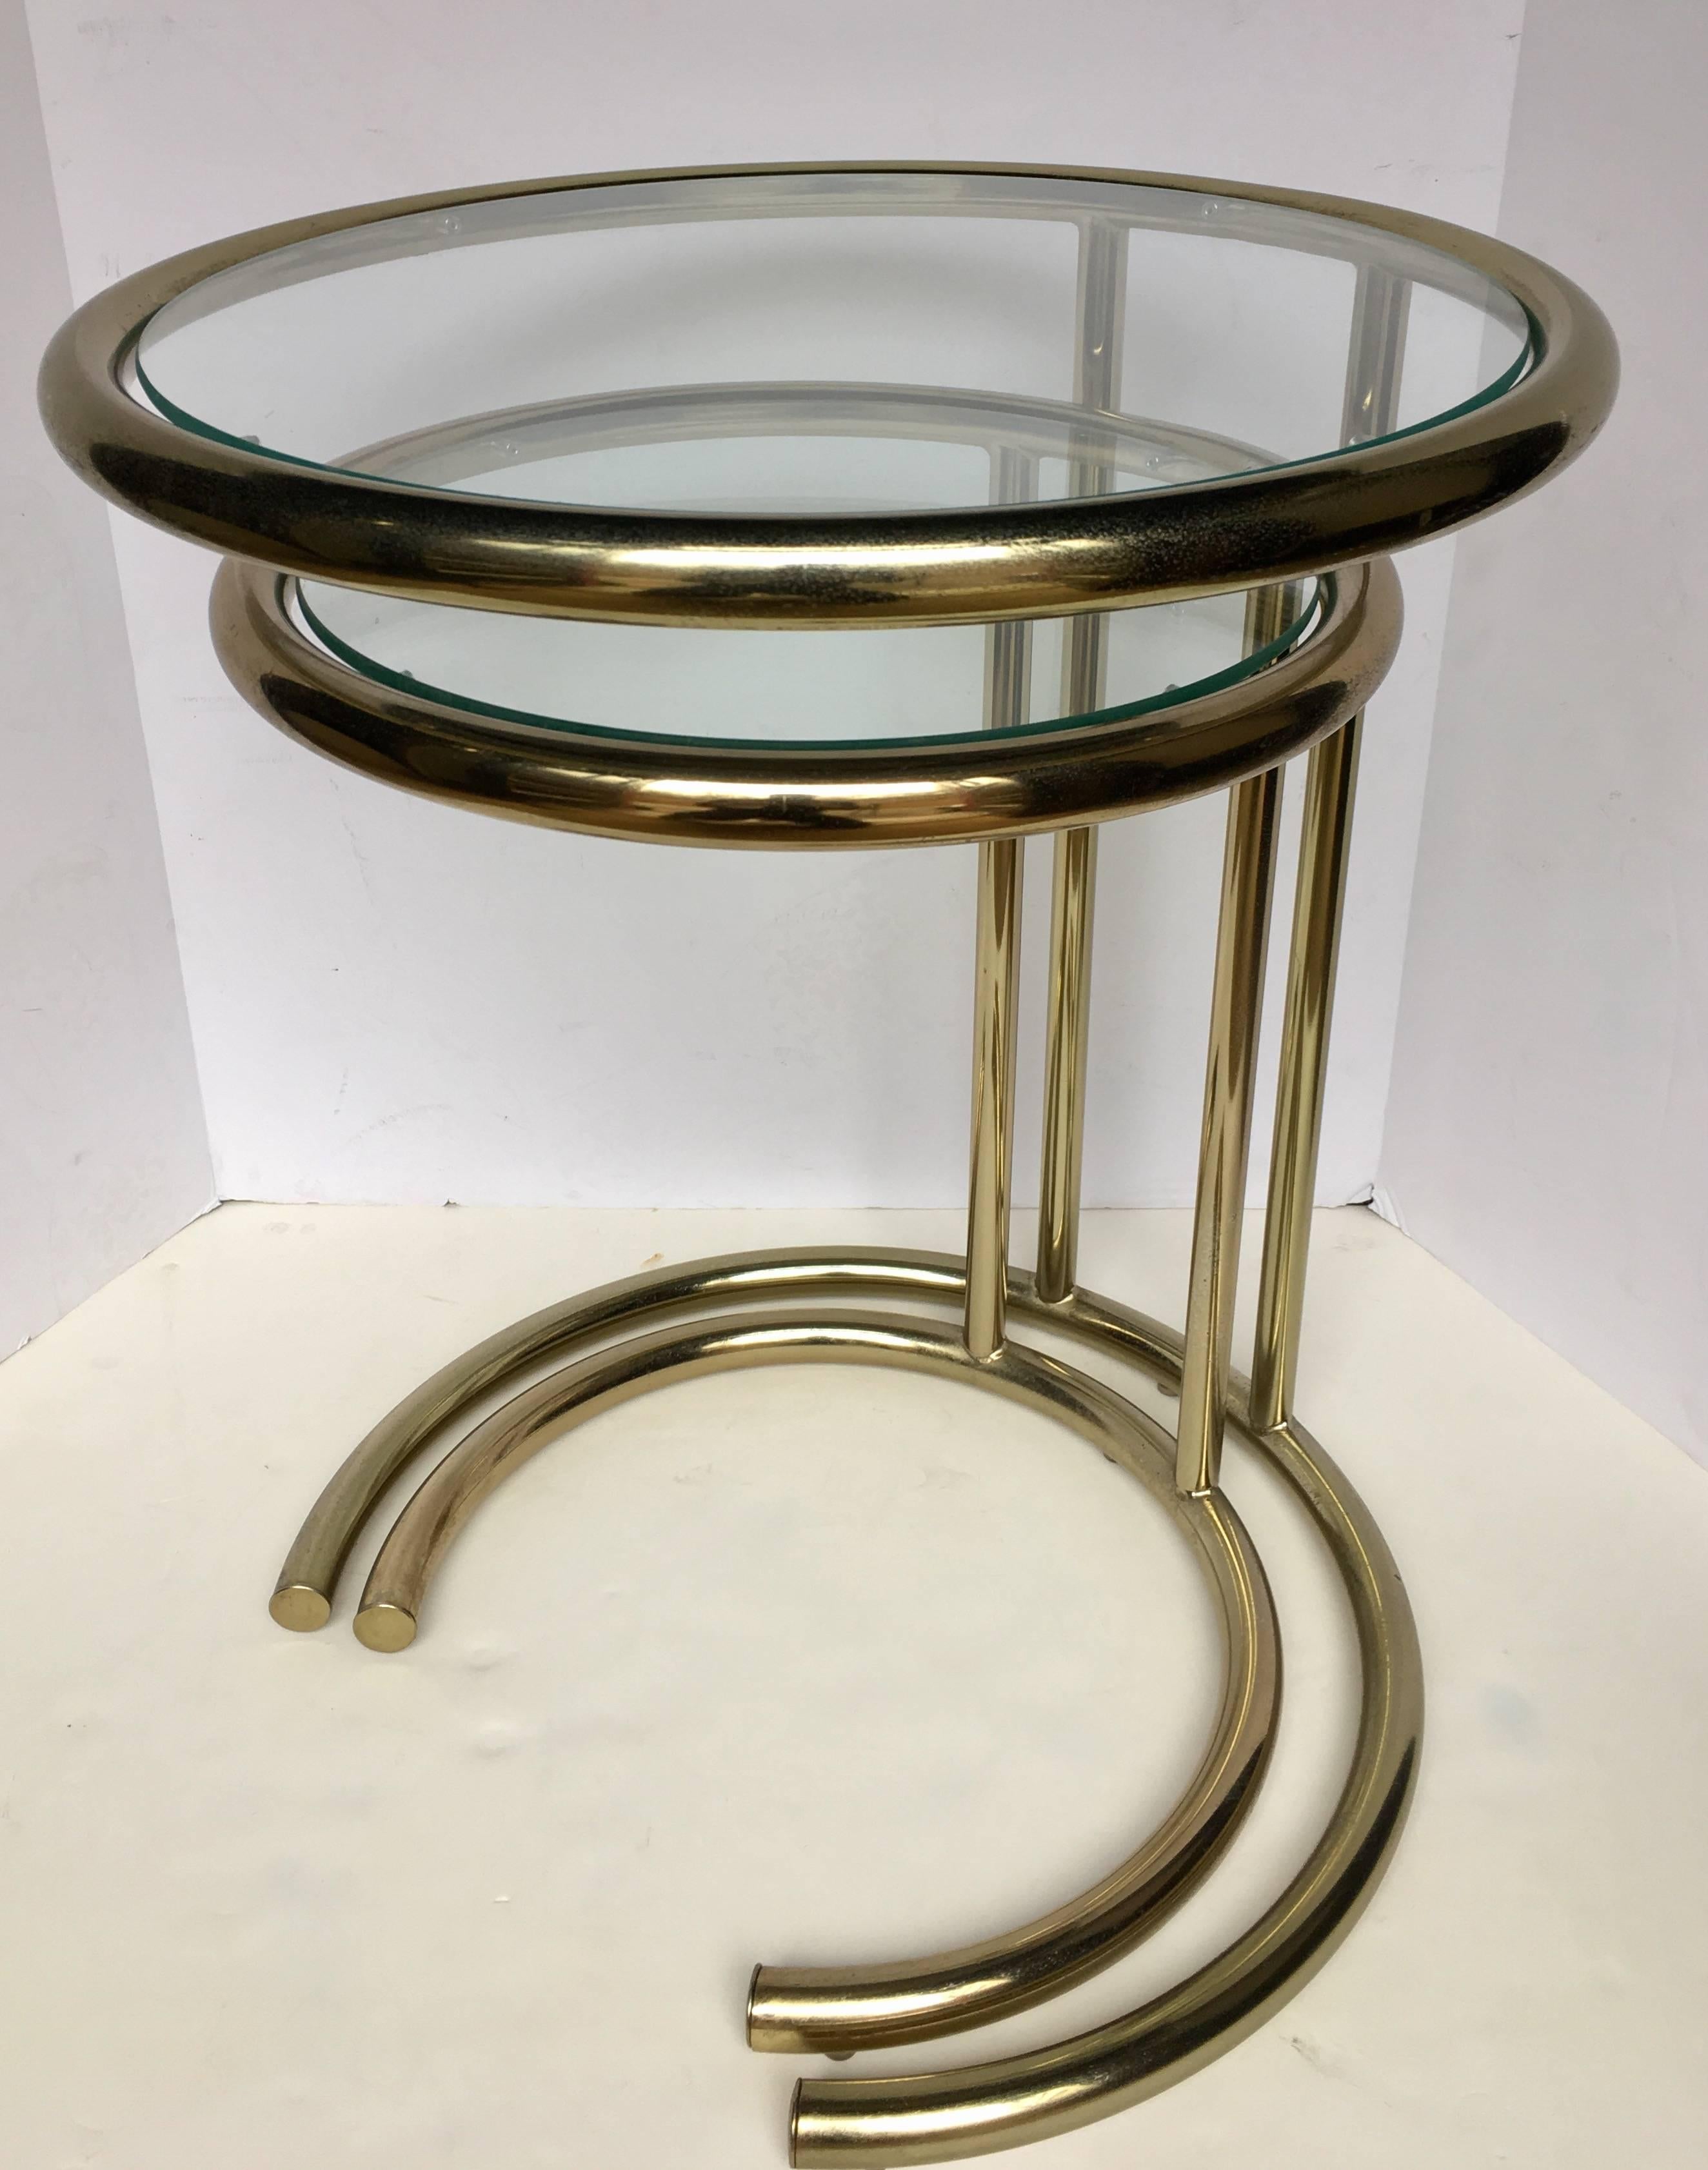 Set of two Mid-Century Modern brass-plated nesting accent tables in the style of Eileen Gray.  Each round end or side table features a tubular metal frame with removable round clear glass inserts. 

Measures: Large table: 21.5 H, 18 D
Small table: